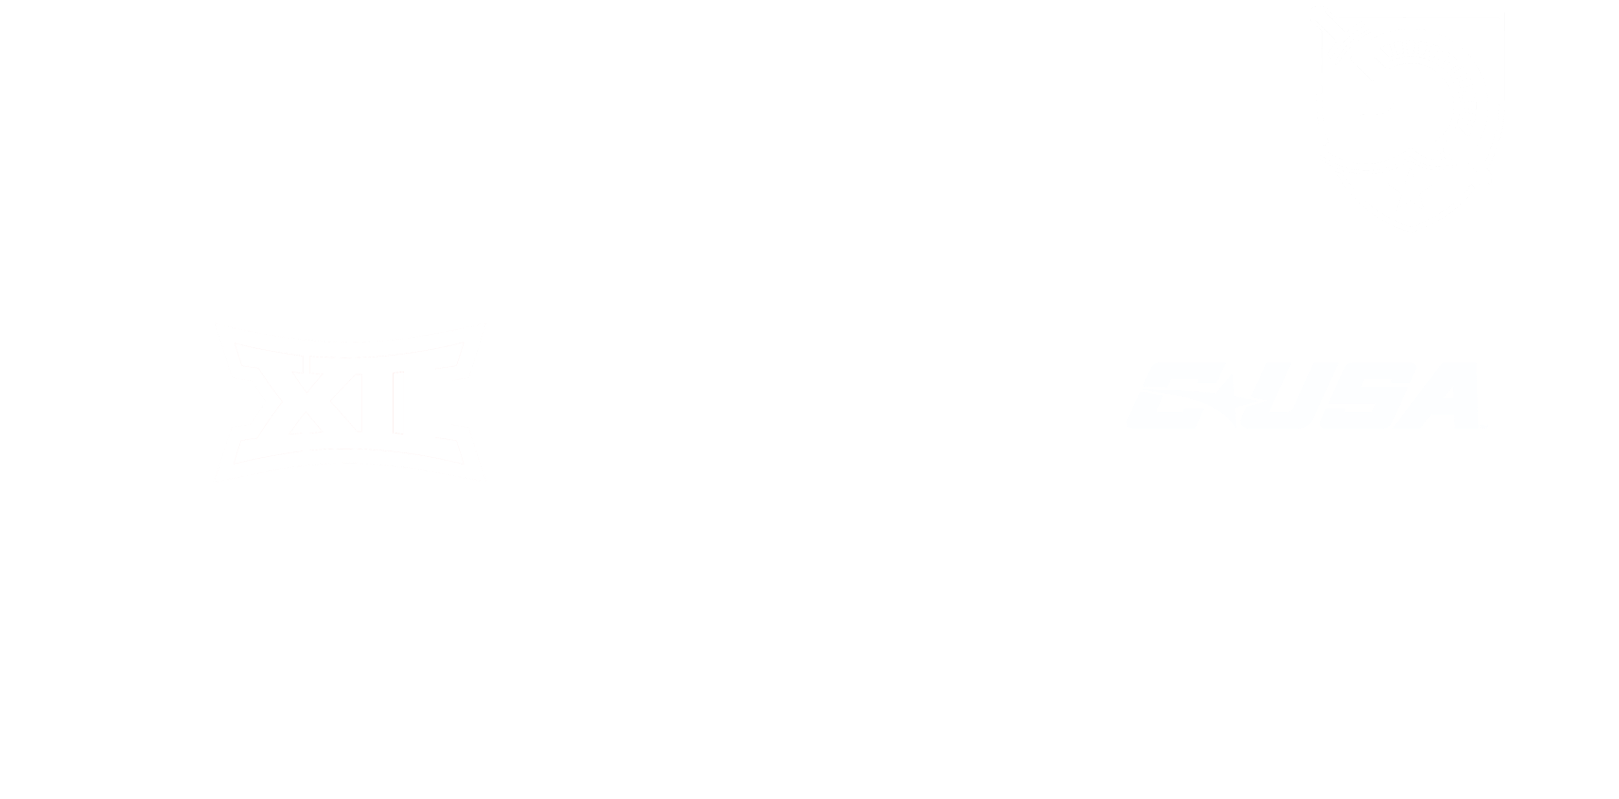 Conference logos@2x